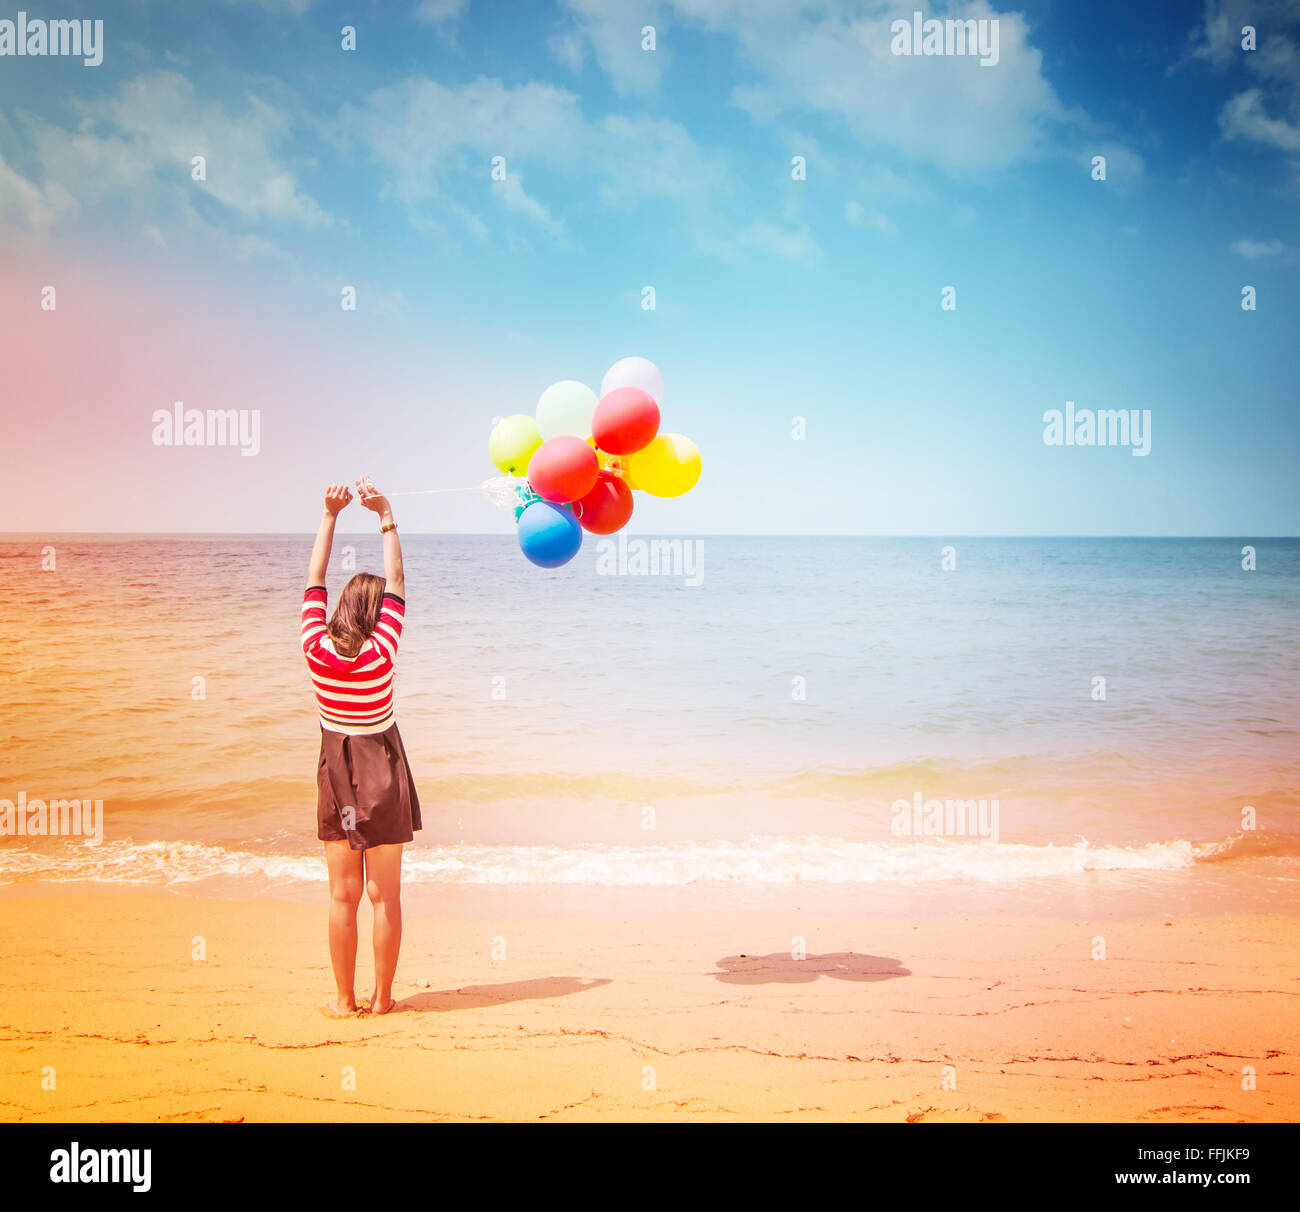 Woman with colorful Balloons on the beach,Outdoors lifestyle filters images Stock Photo